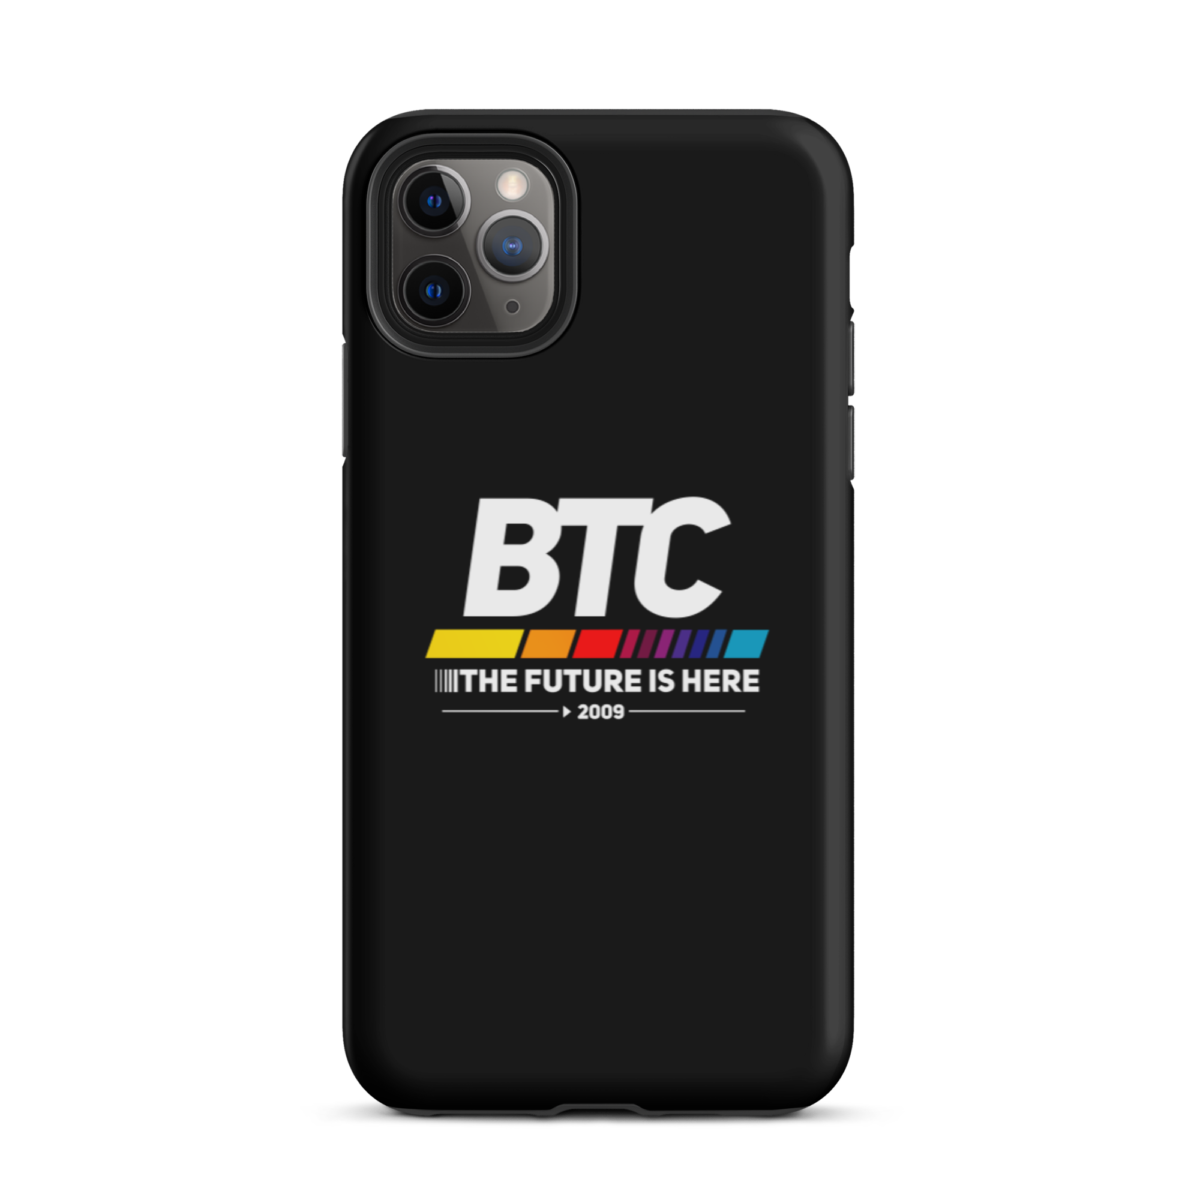 tough iphone case glossy iphone 11 pro max front 6345d56a31006 - BTC: The Future Is Here Tough iPhone Case